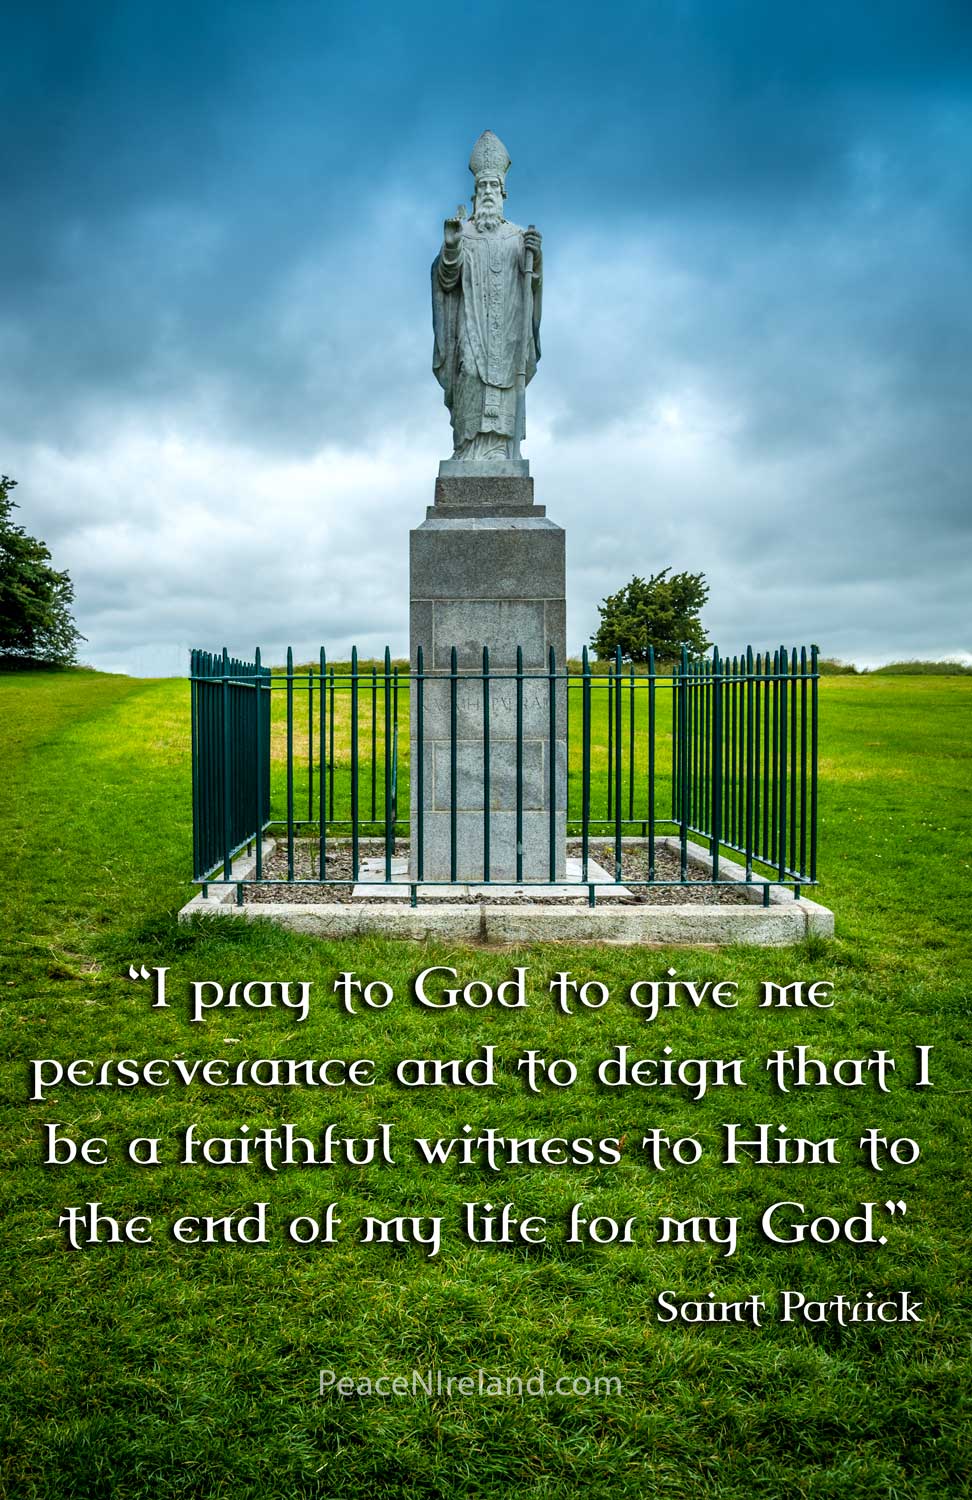 Figure of St Patrick at Hill of Tara, County Meath, where he defied the orders of the High King.